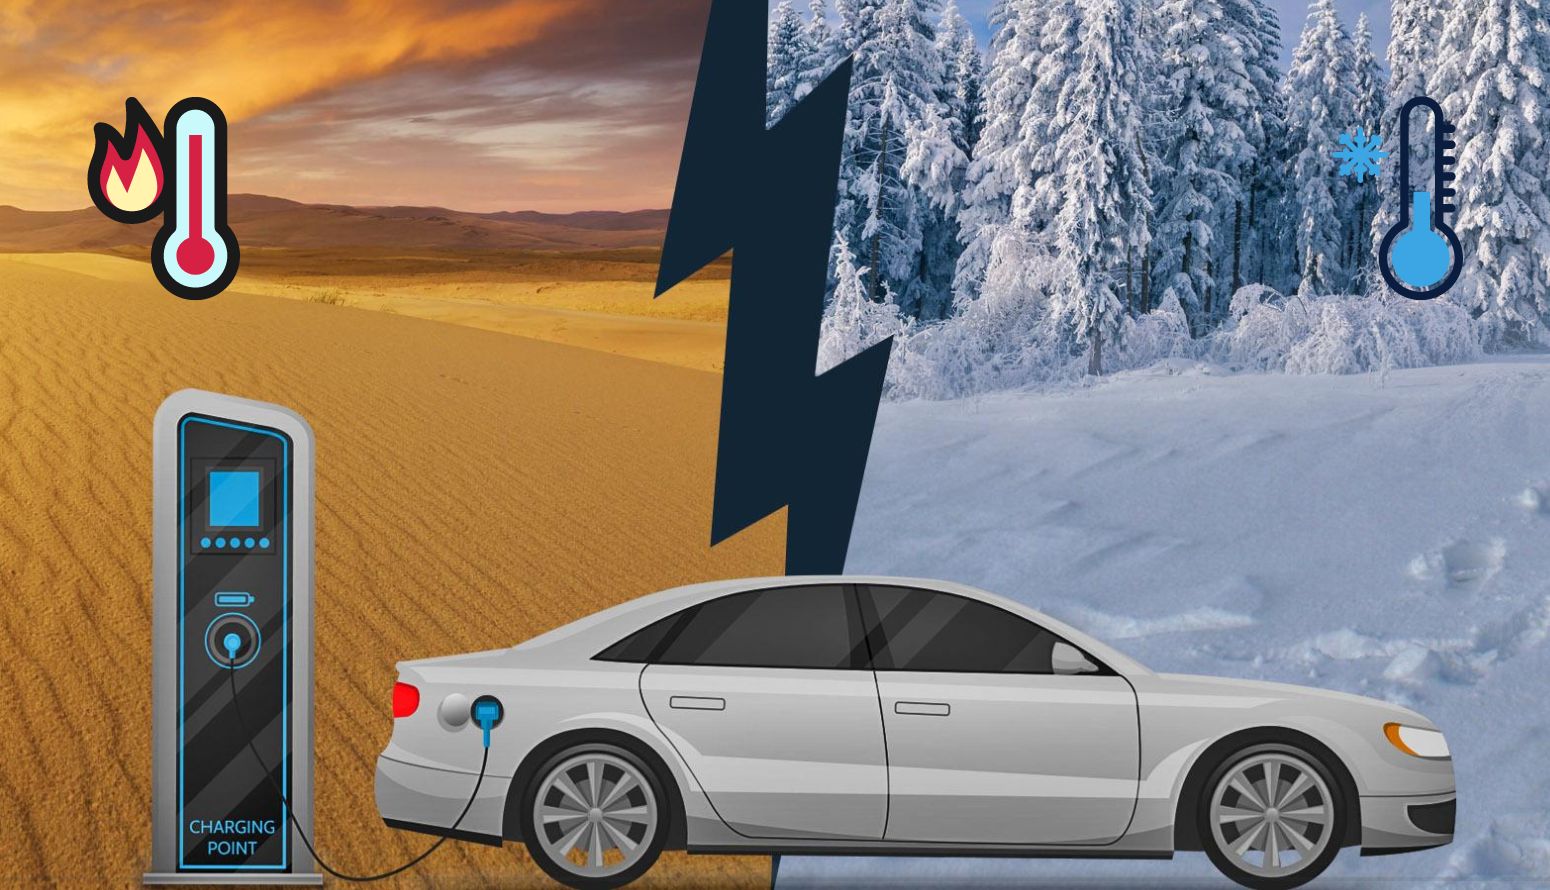 https://e-vehicleinfo.com/how-does-hot-and-cold-weather-affect-ev-range/